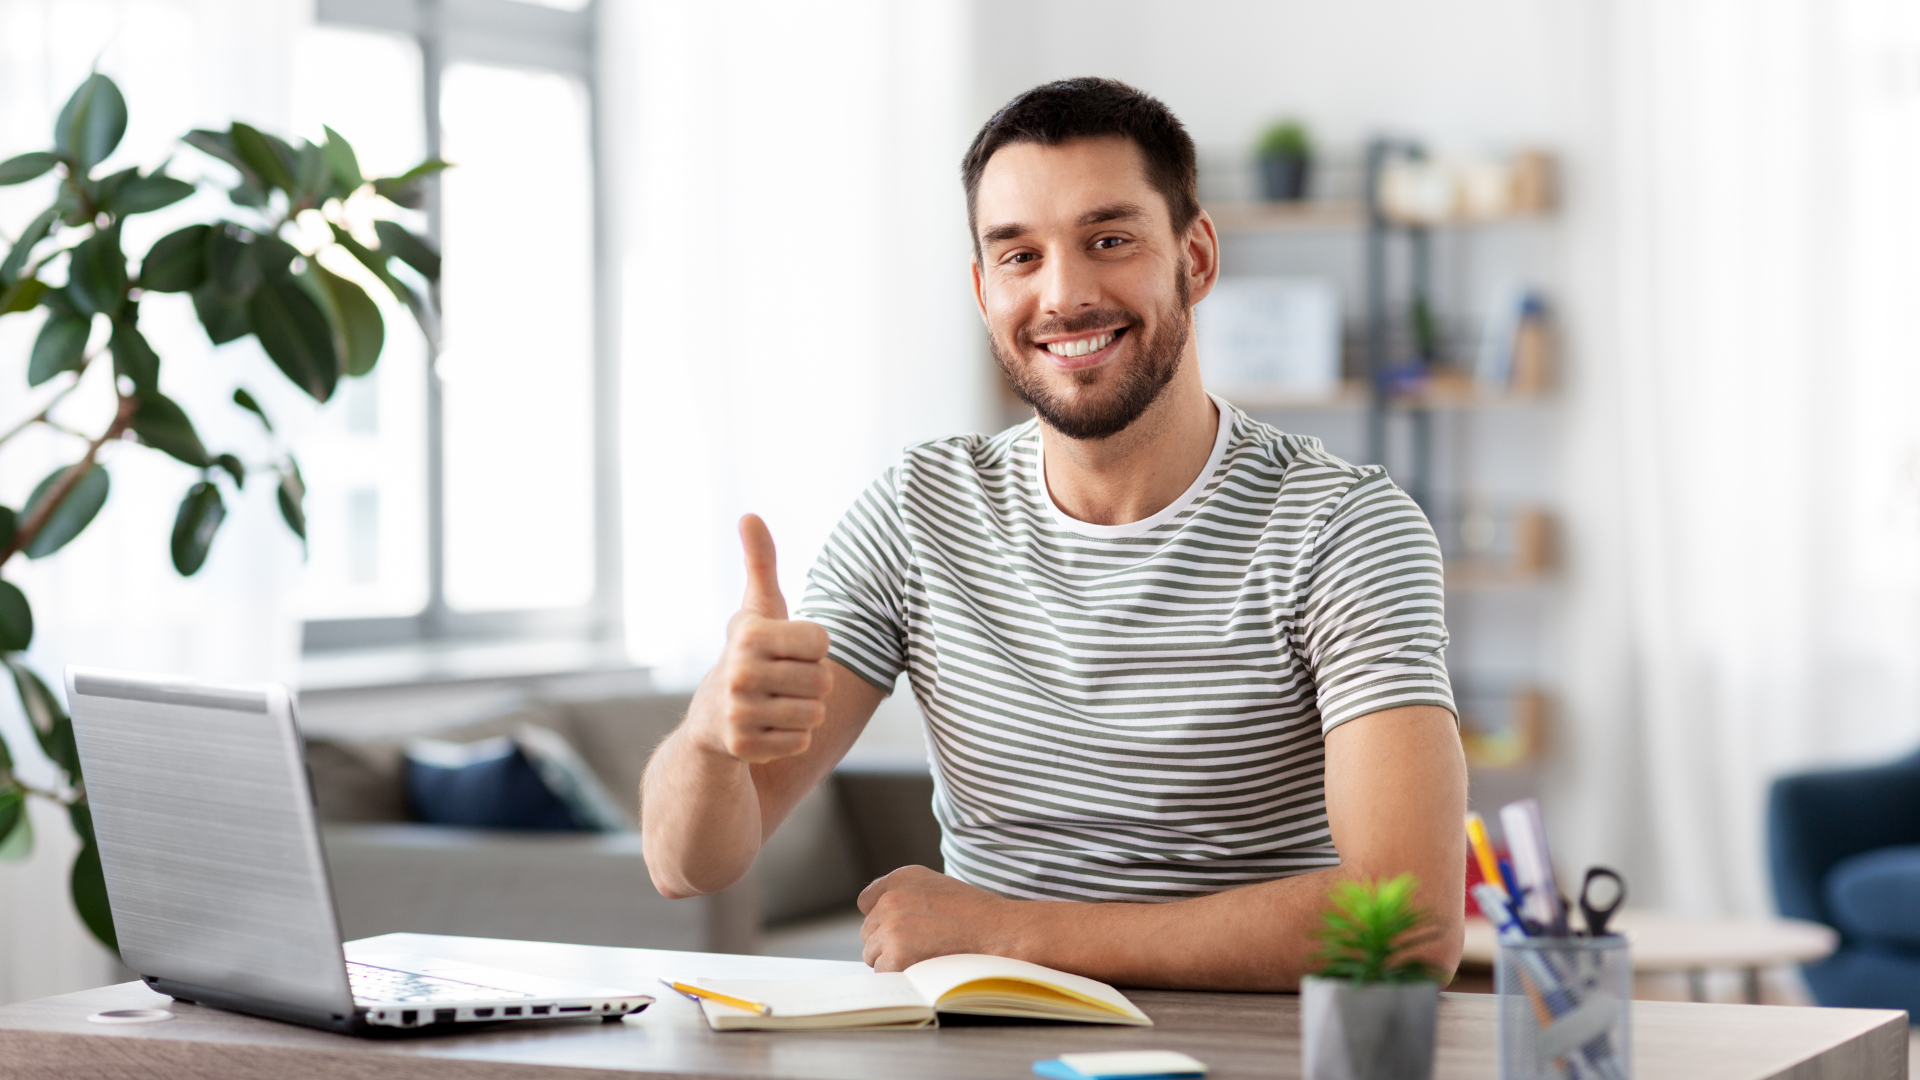 A remote worker gives a thumbs up as he experiences the benefits of remote work security